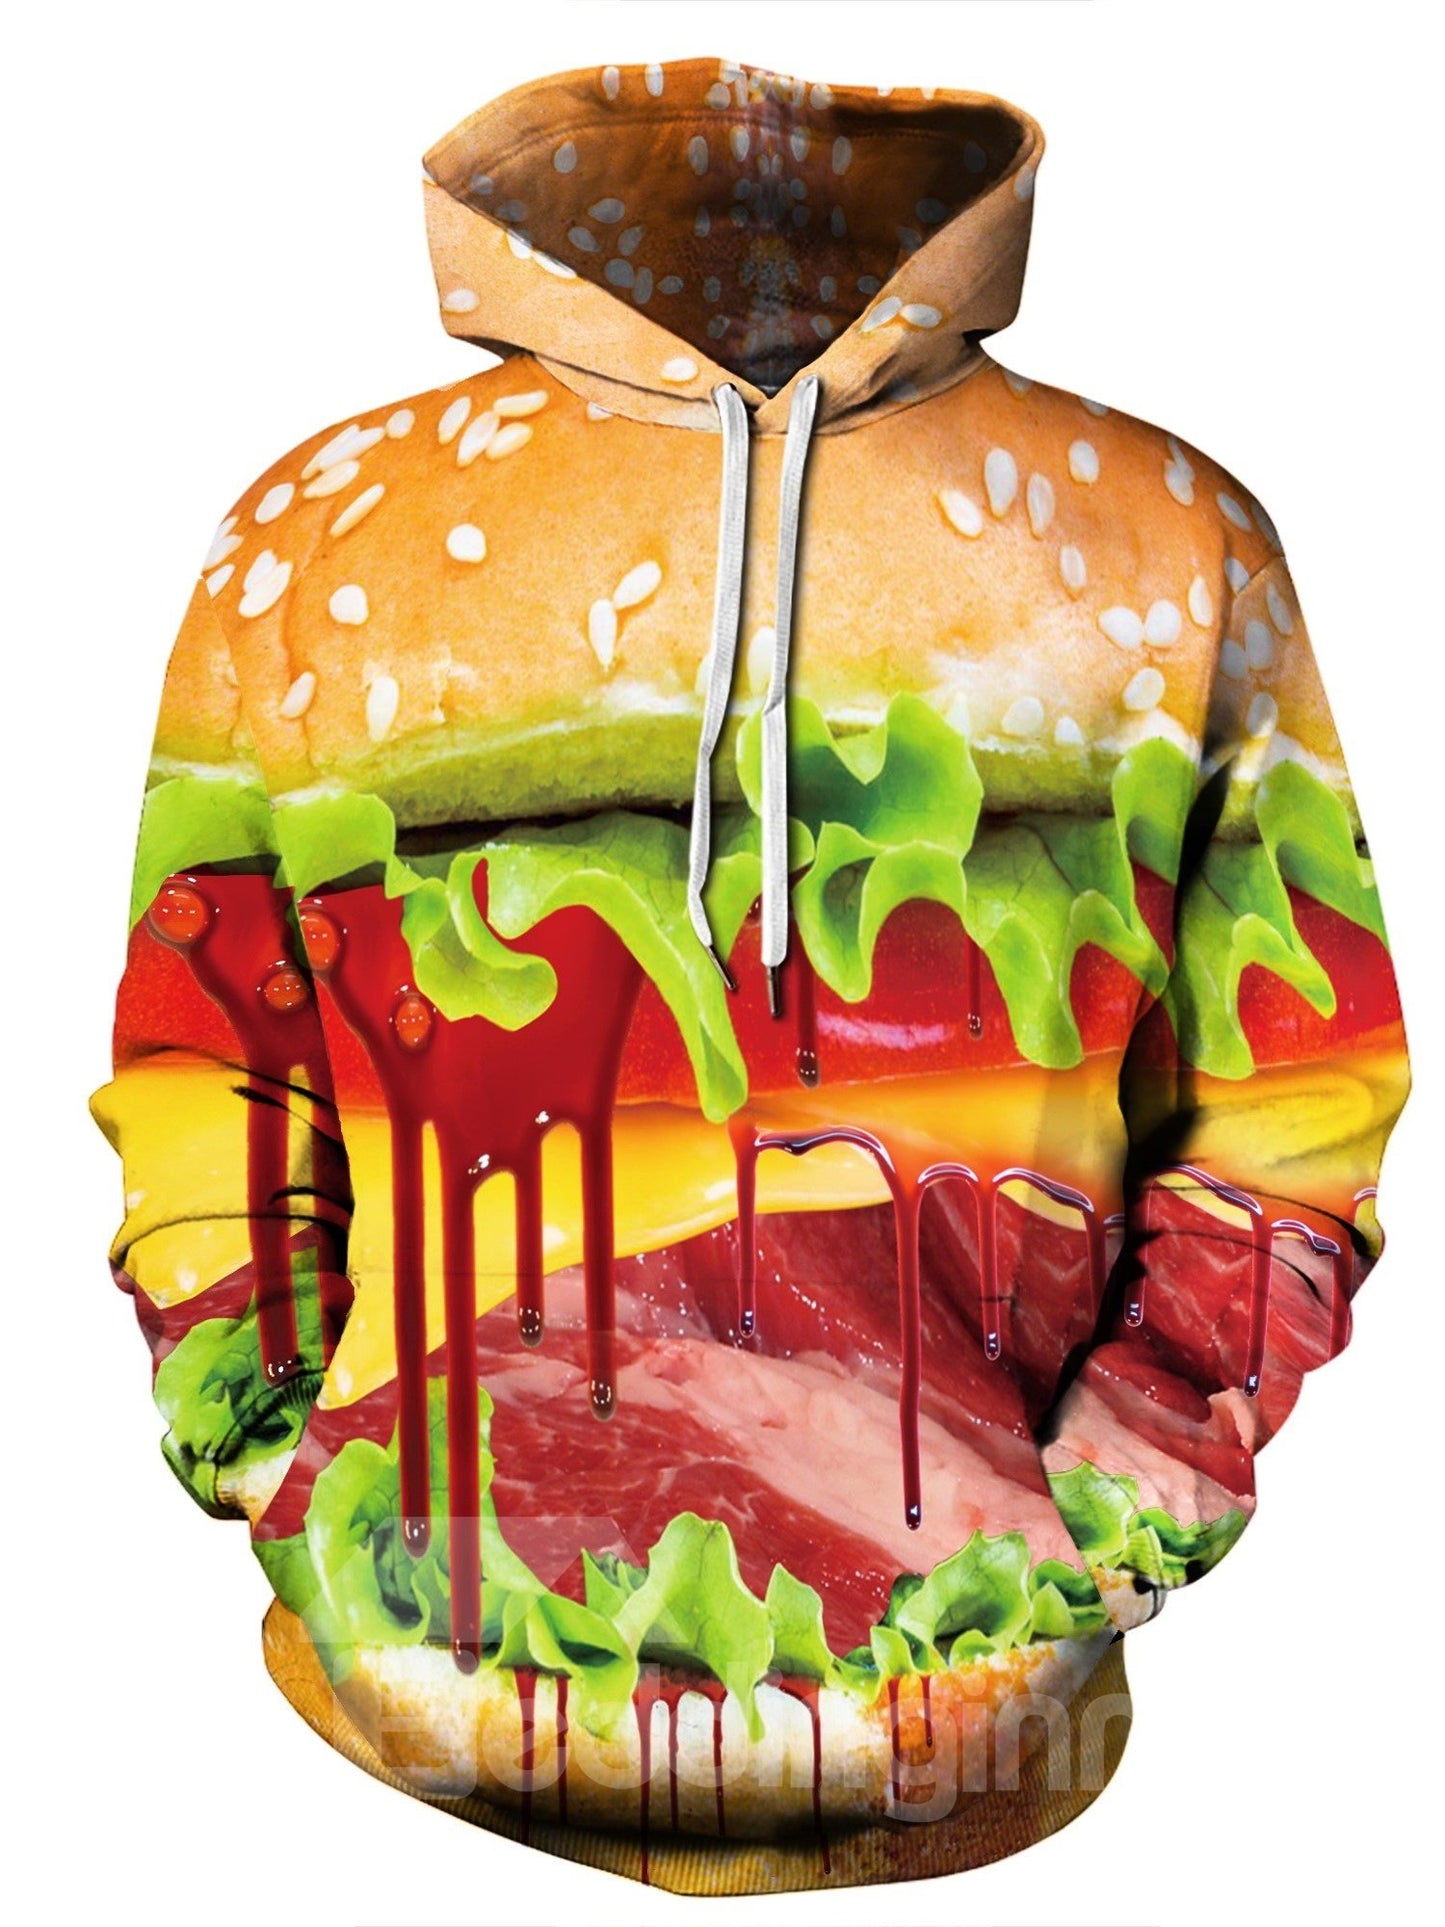 Long Sleeve Delicious Hamburger Pattern 3D Painted Casual Hoodies